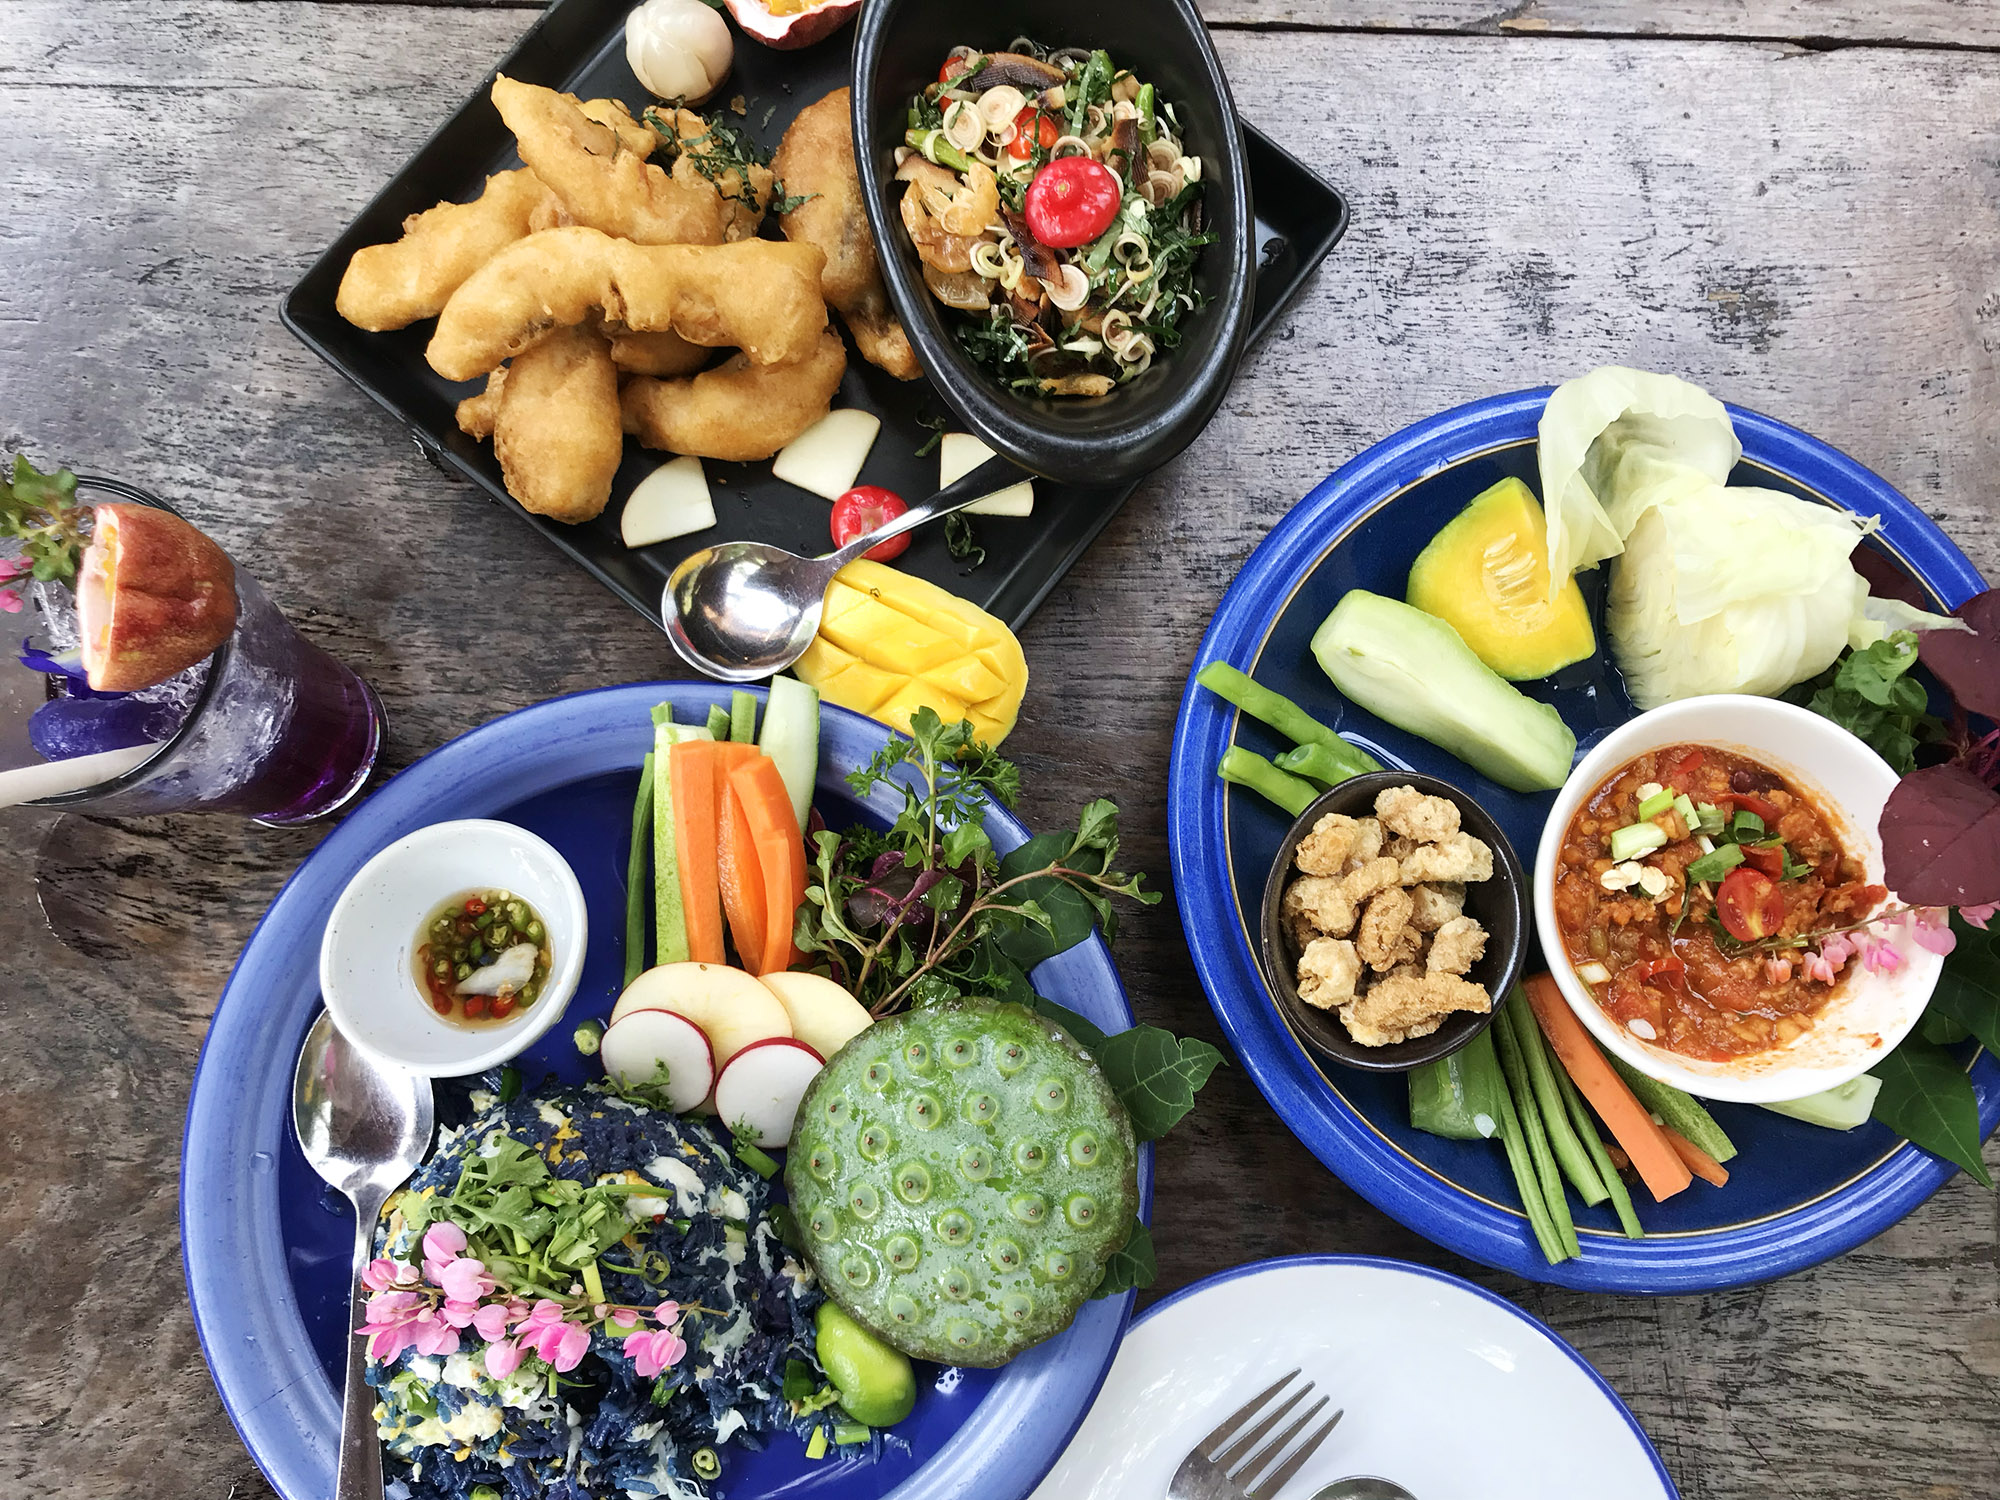 Chiang Mai: Meena Rice Based Cuisine - A colorful lunch